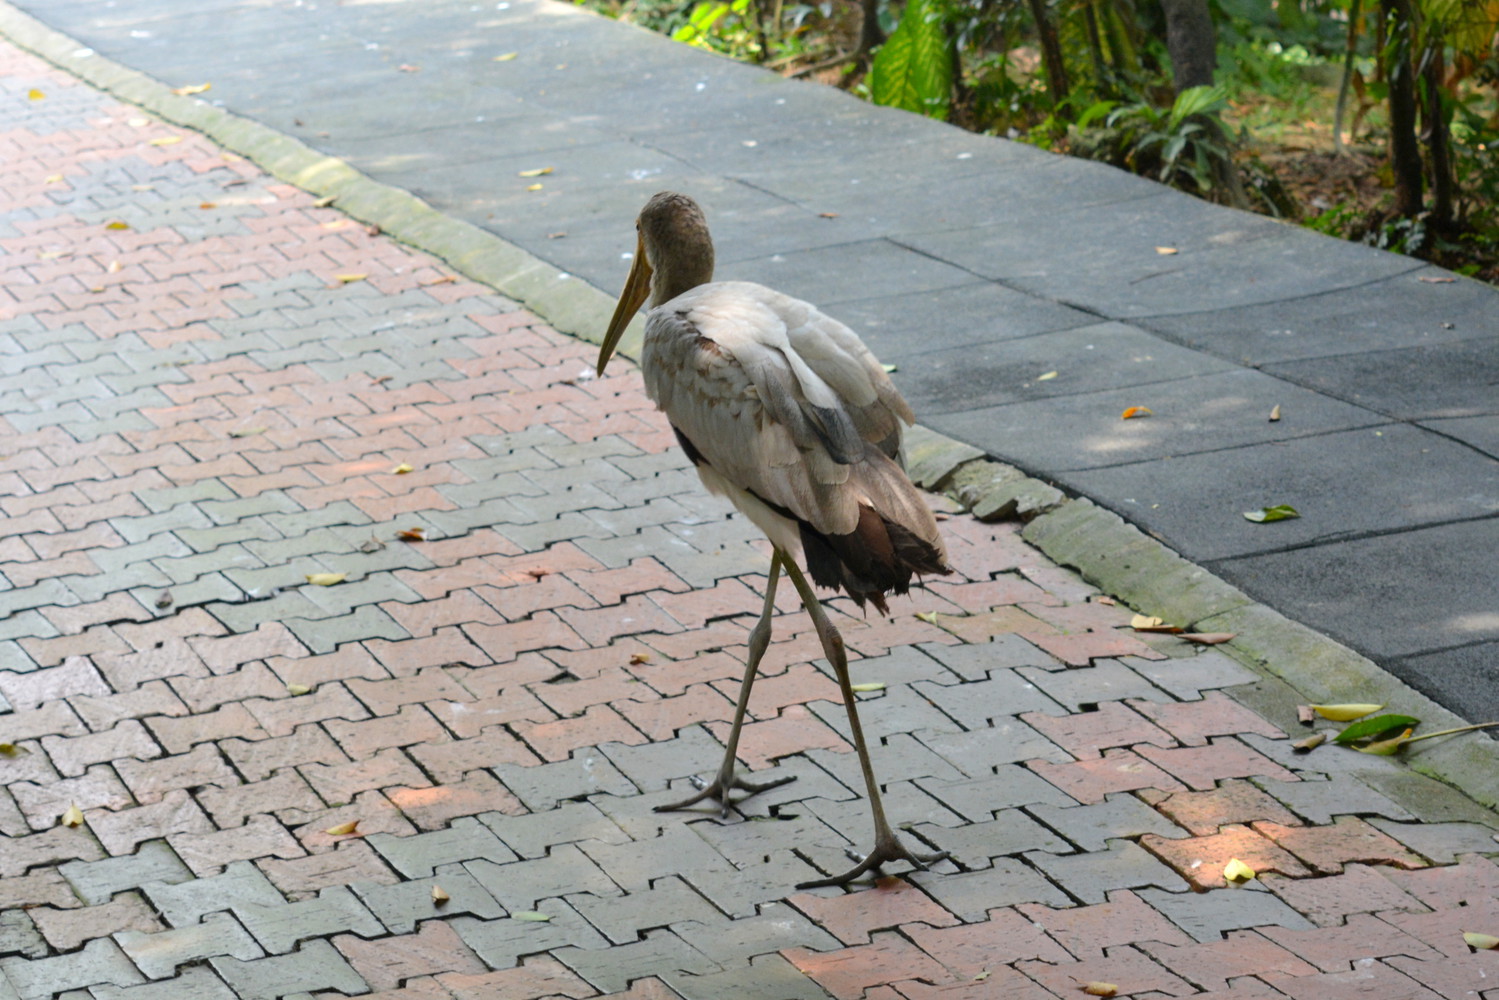 A stork walking on the pavement in a bird park